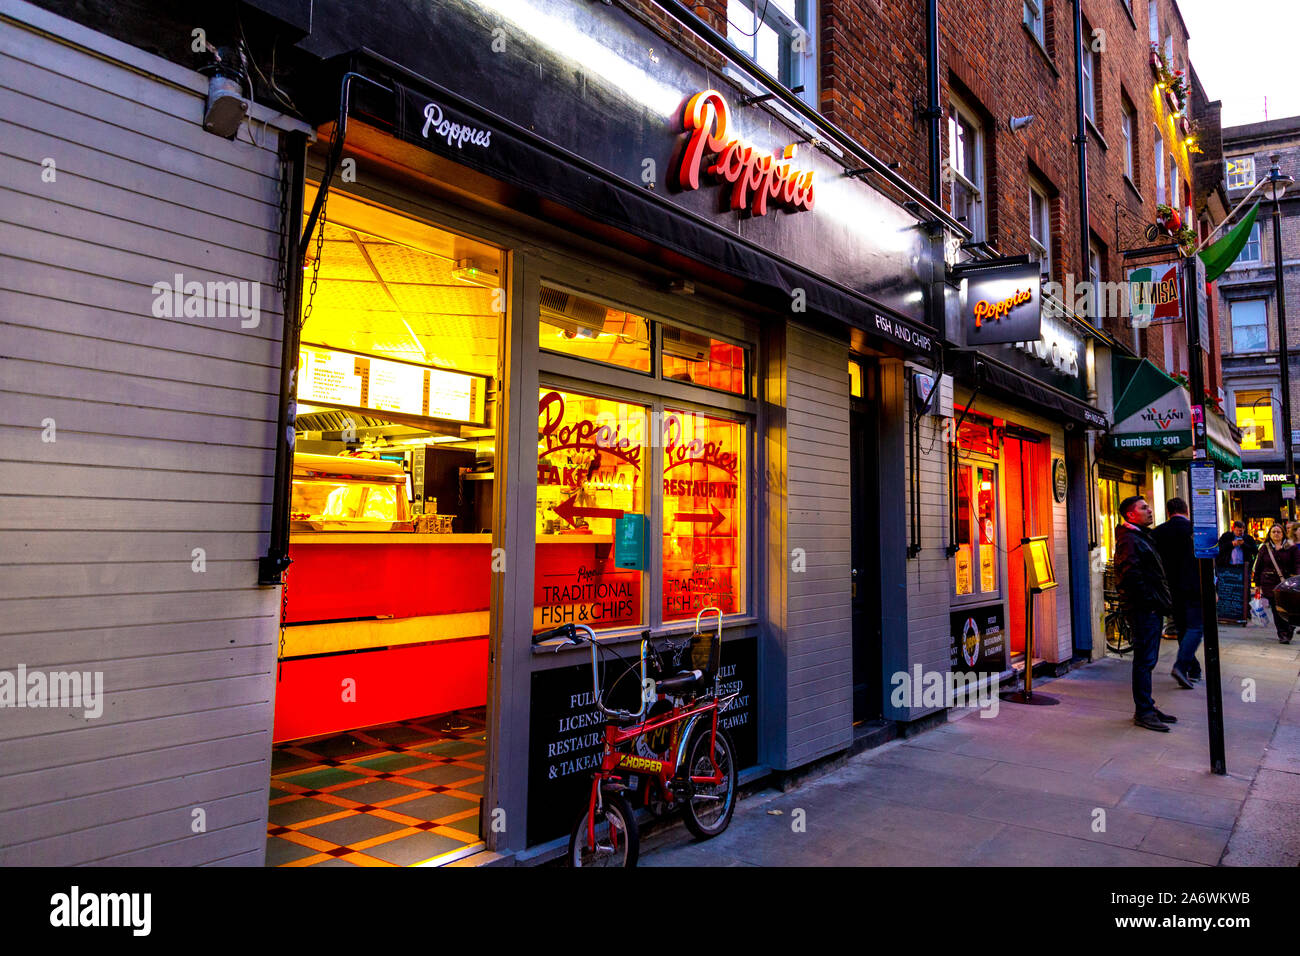 Exterior of Poppie's Fish and Chips shop in Soho, London, UK Stock Photo